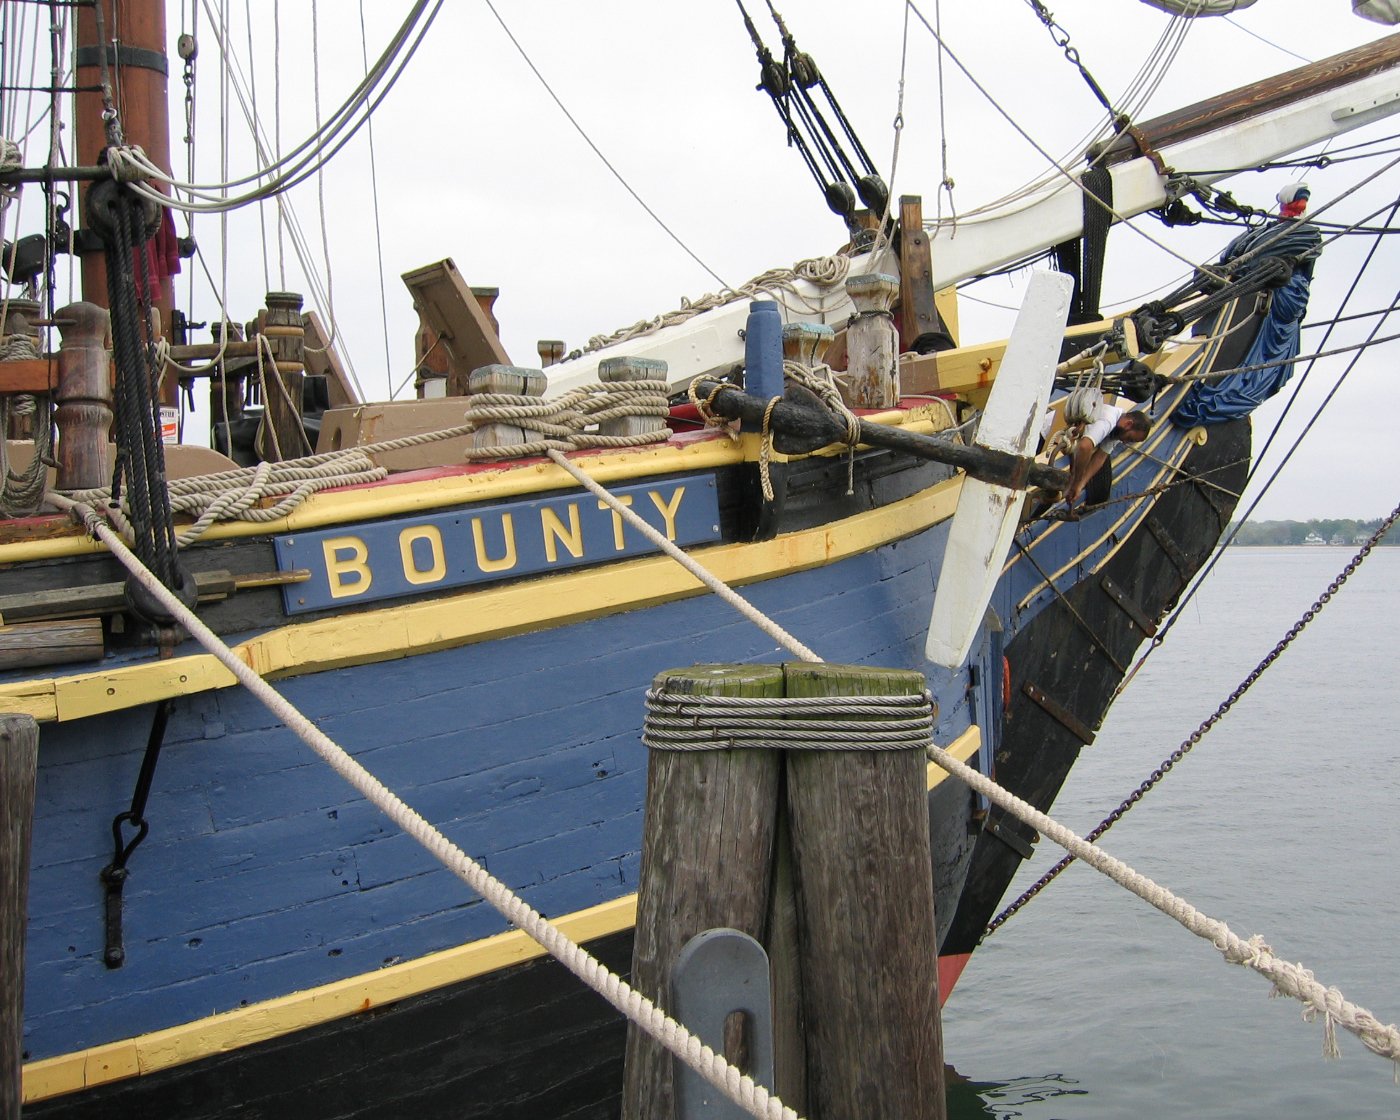 a blue and yellow boat with the name johnny in its name